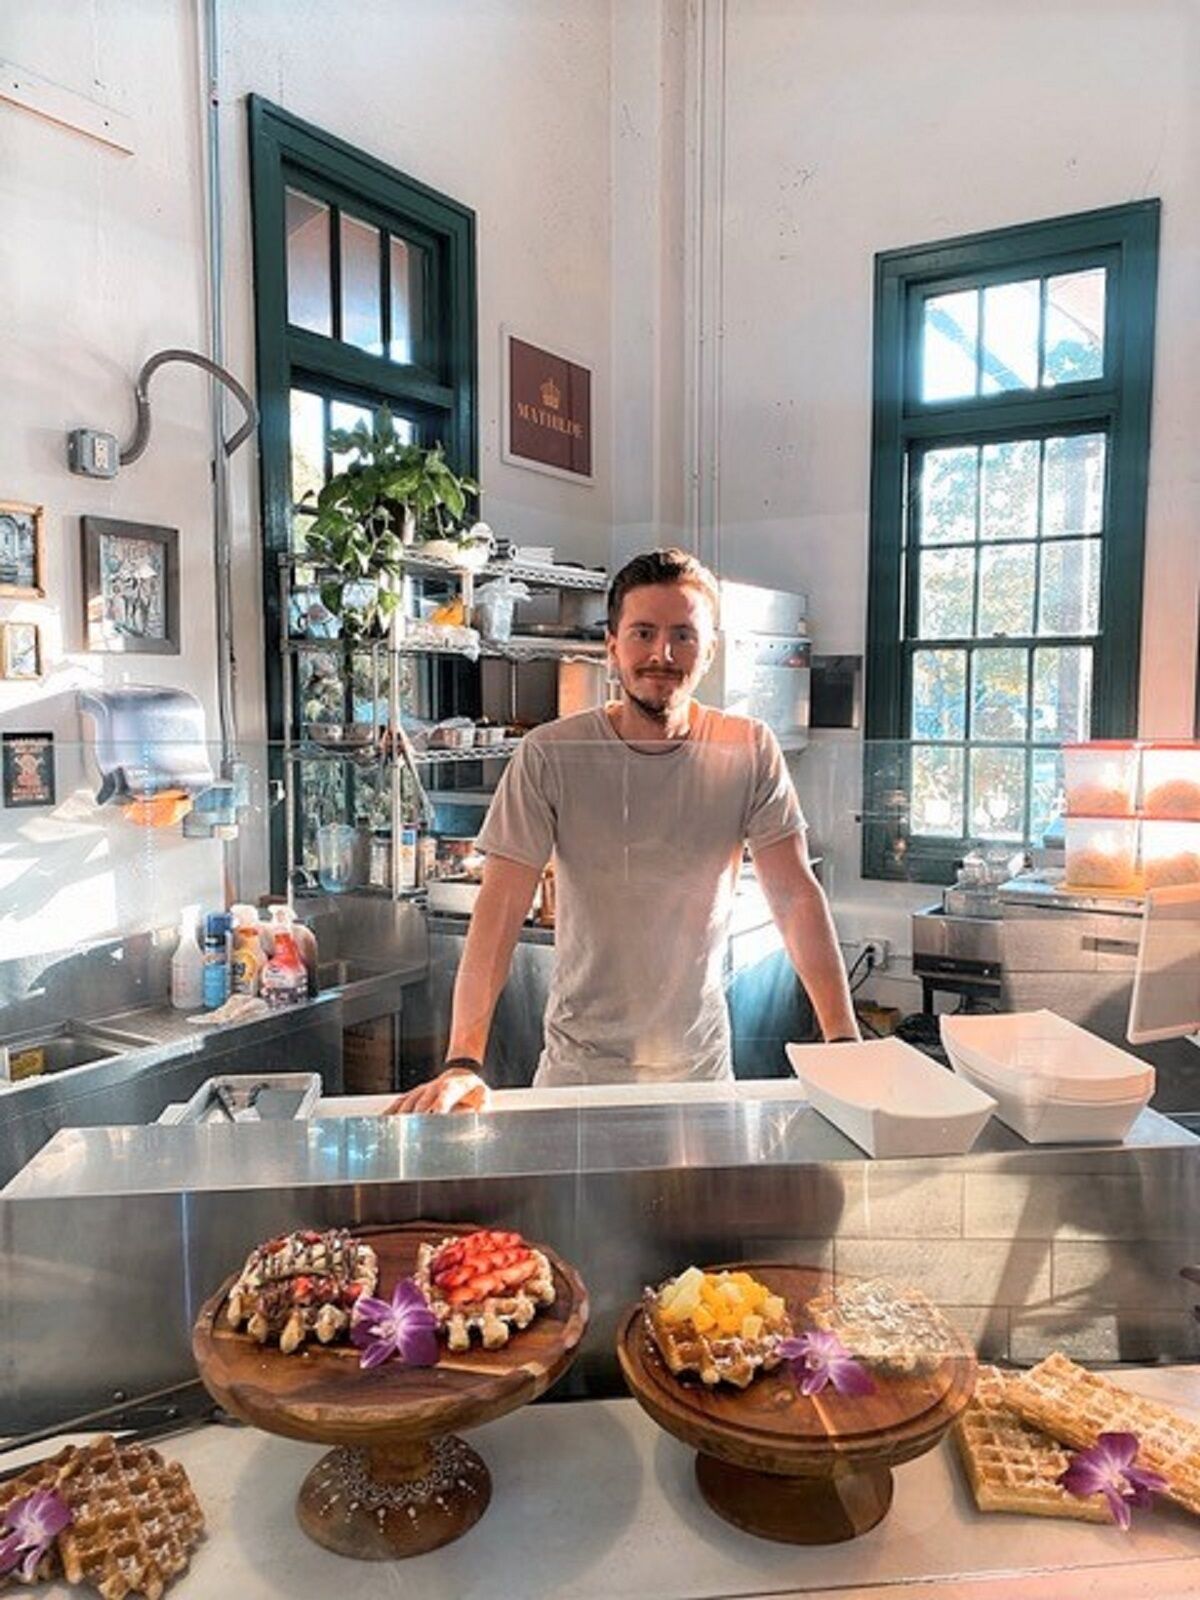 Mathias Lagger and his business partner opened their eatery, Mathilde de Belgique, at Liberty Public Market in October.